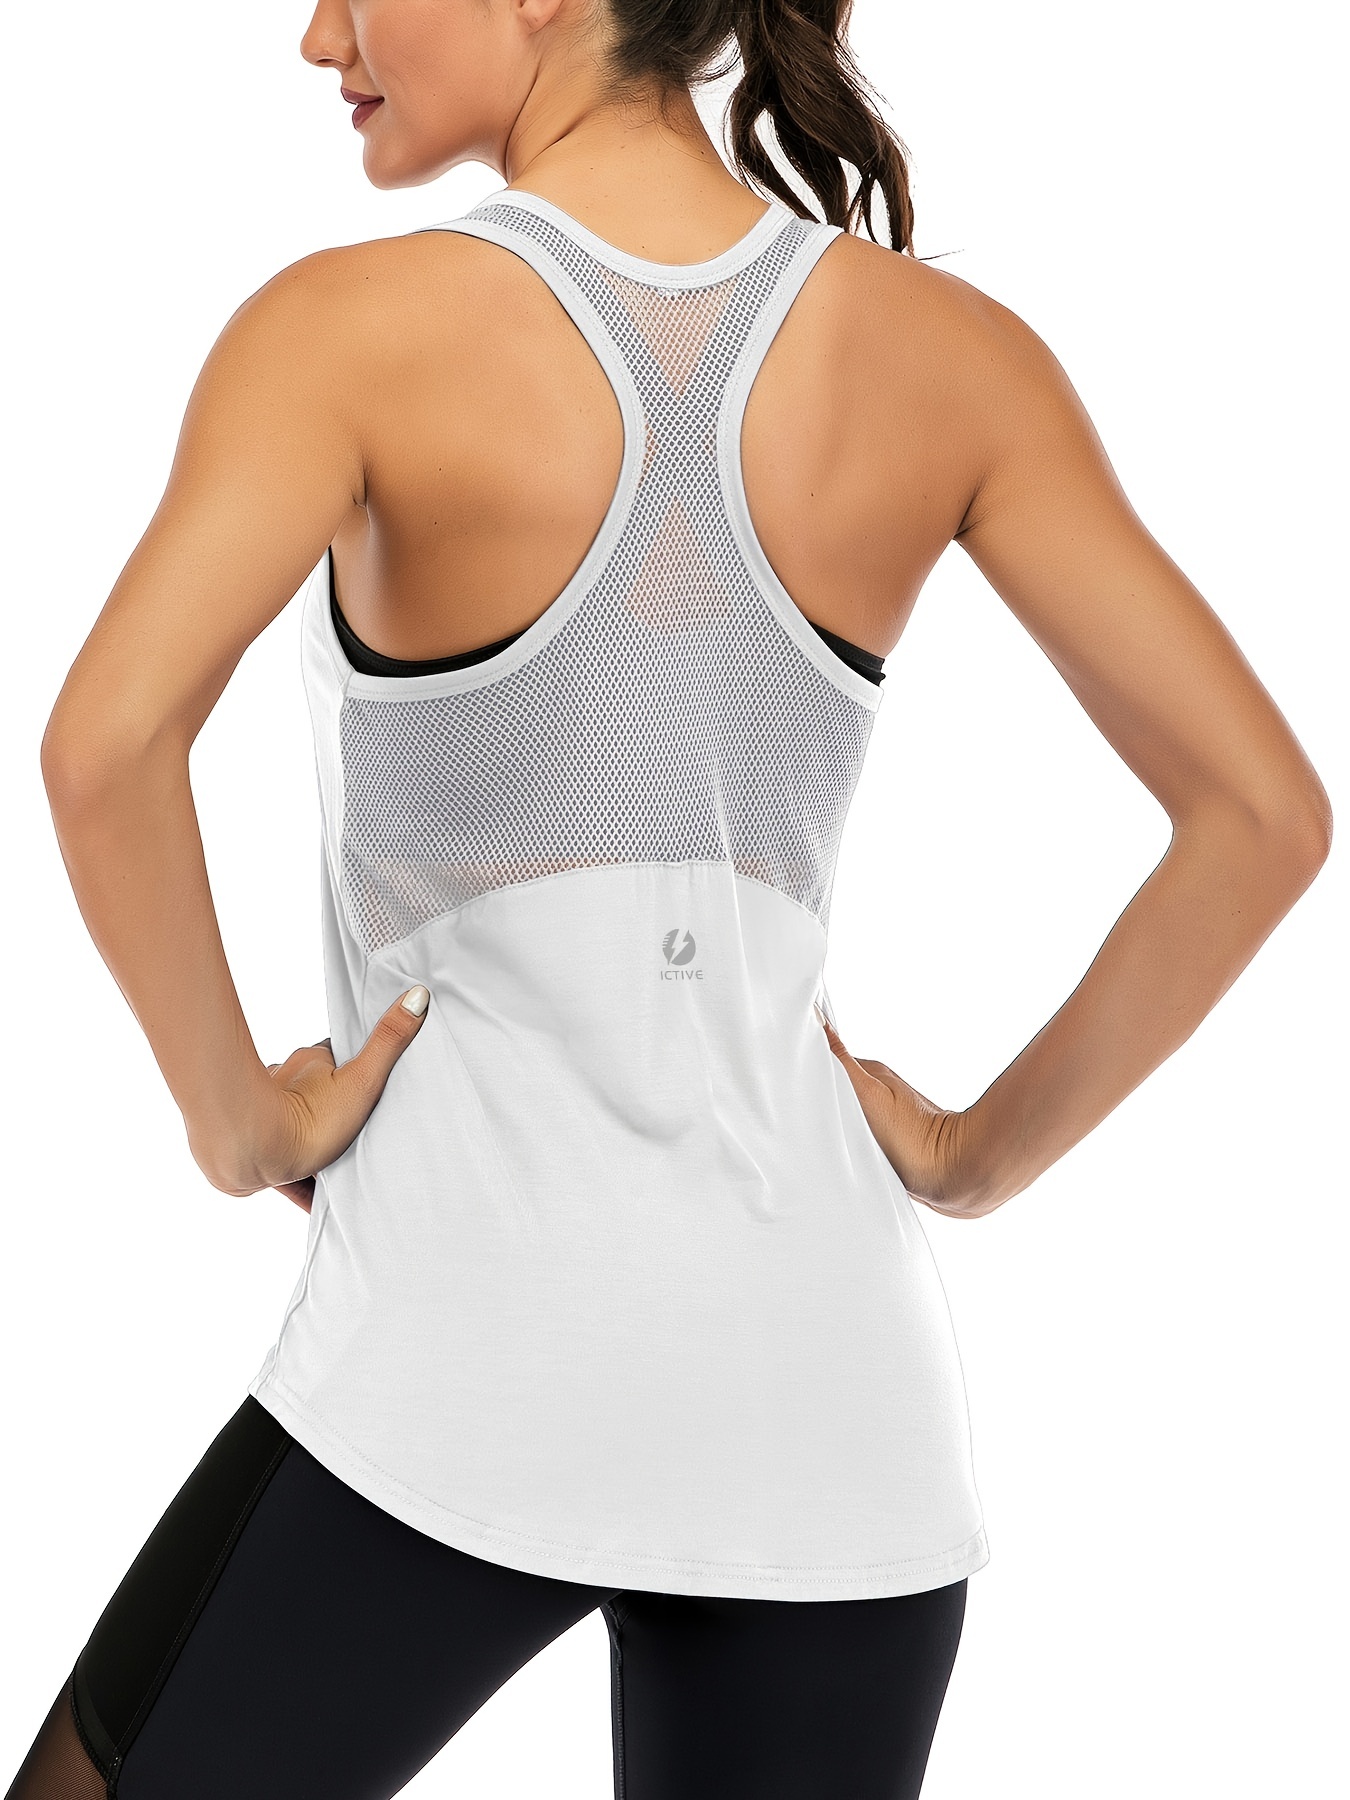 Casual Blouse for Women Activewear Tank Tops Sleeveless Yoga